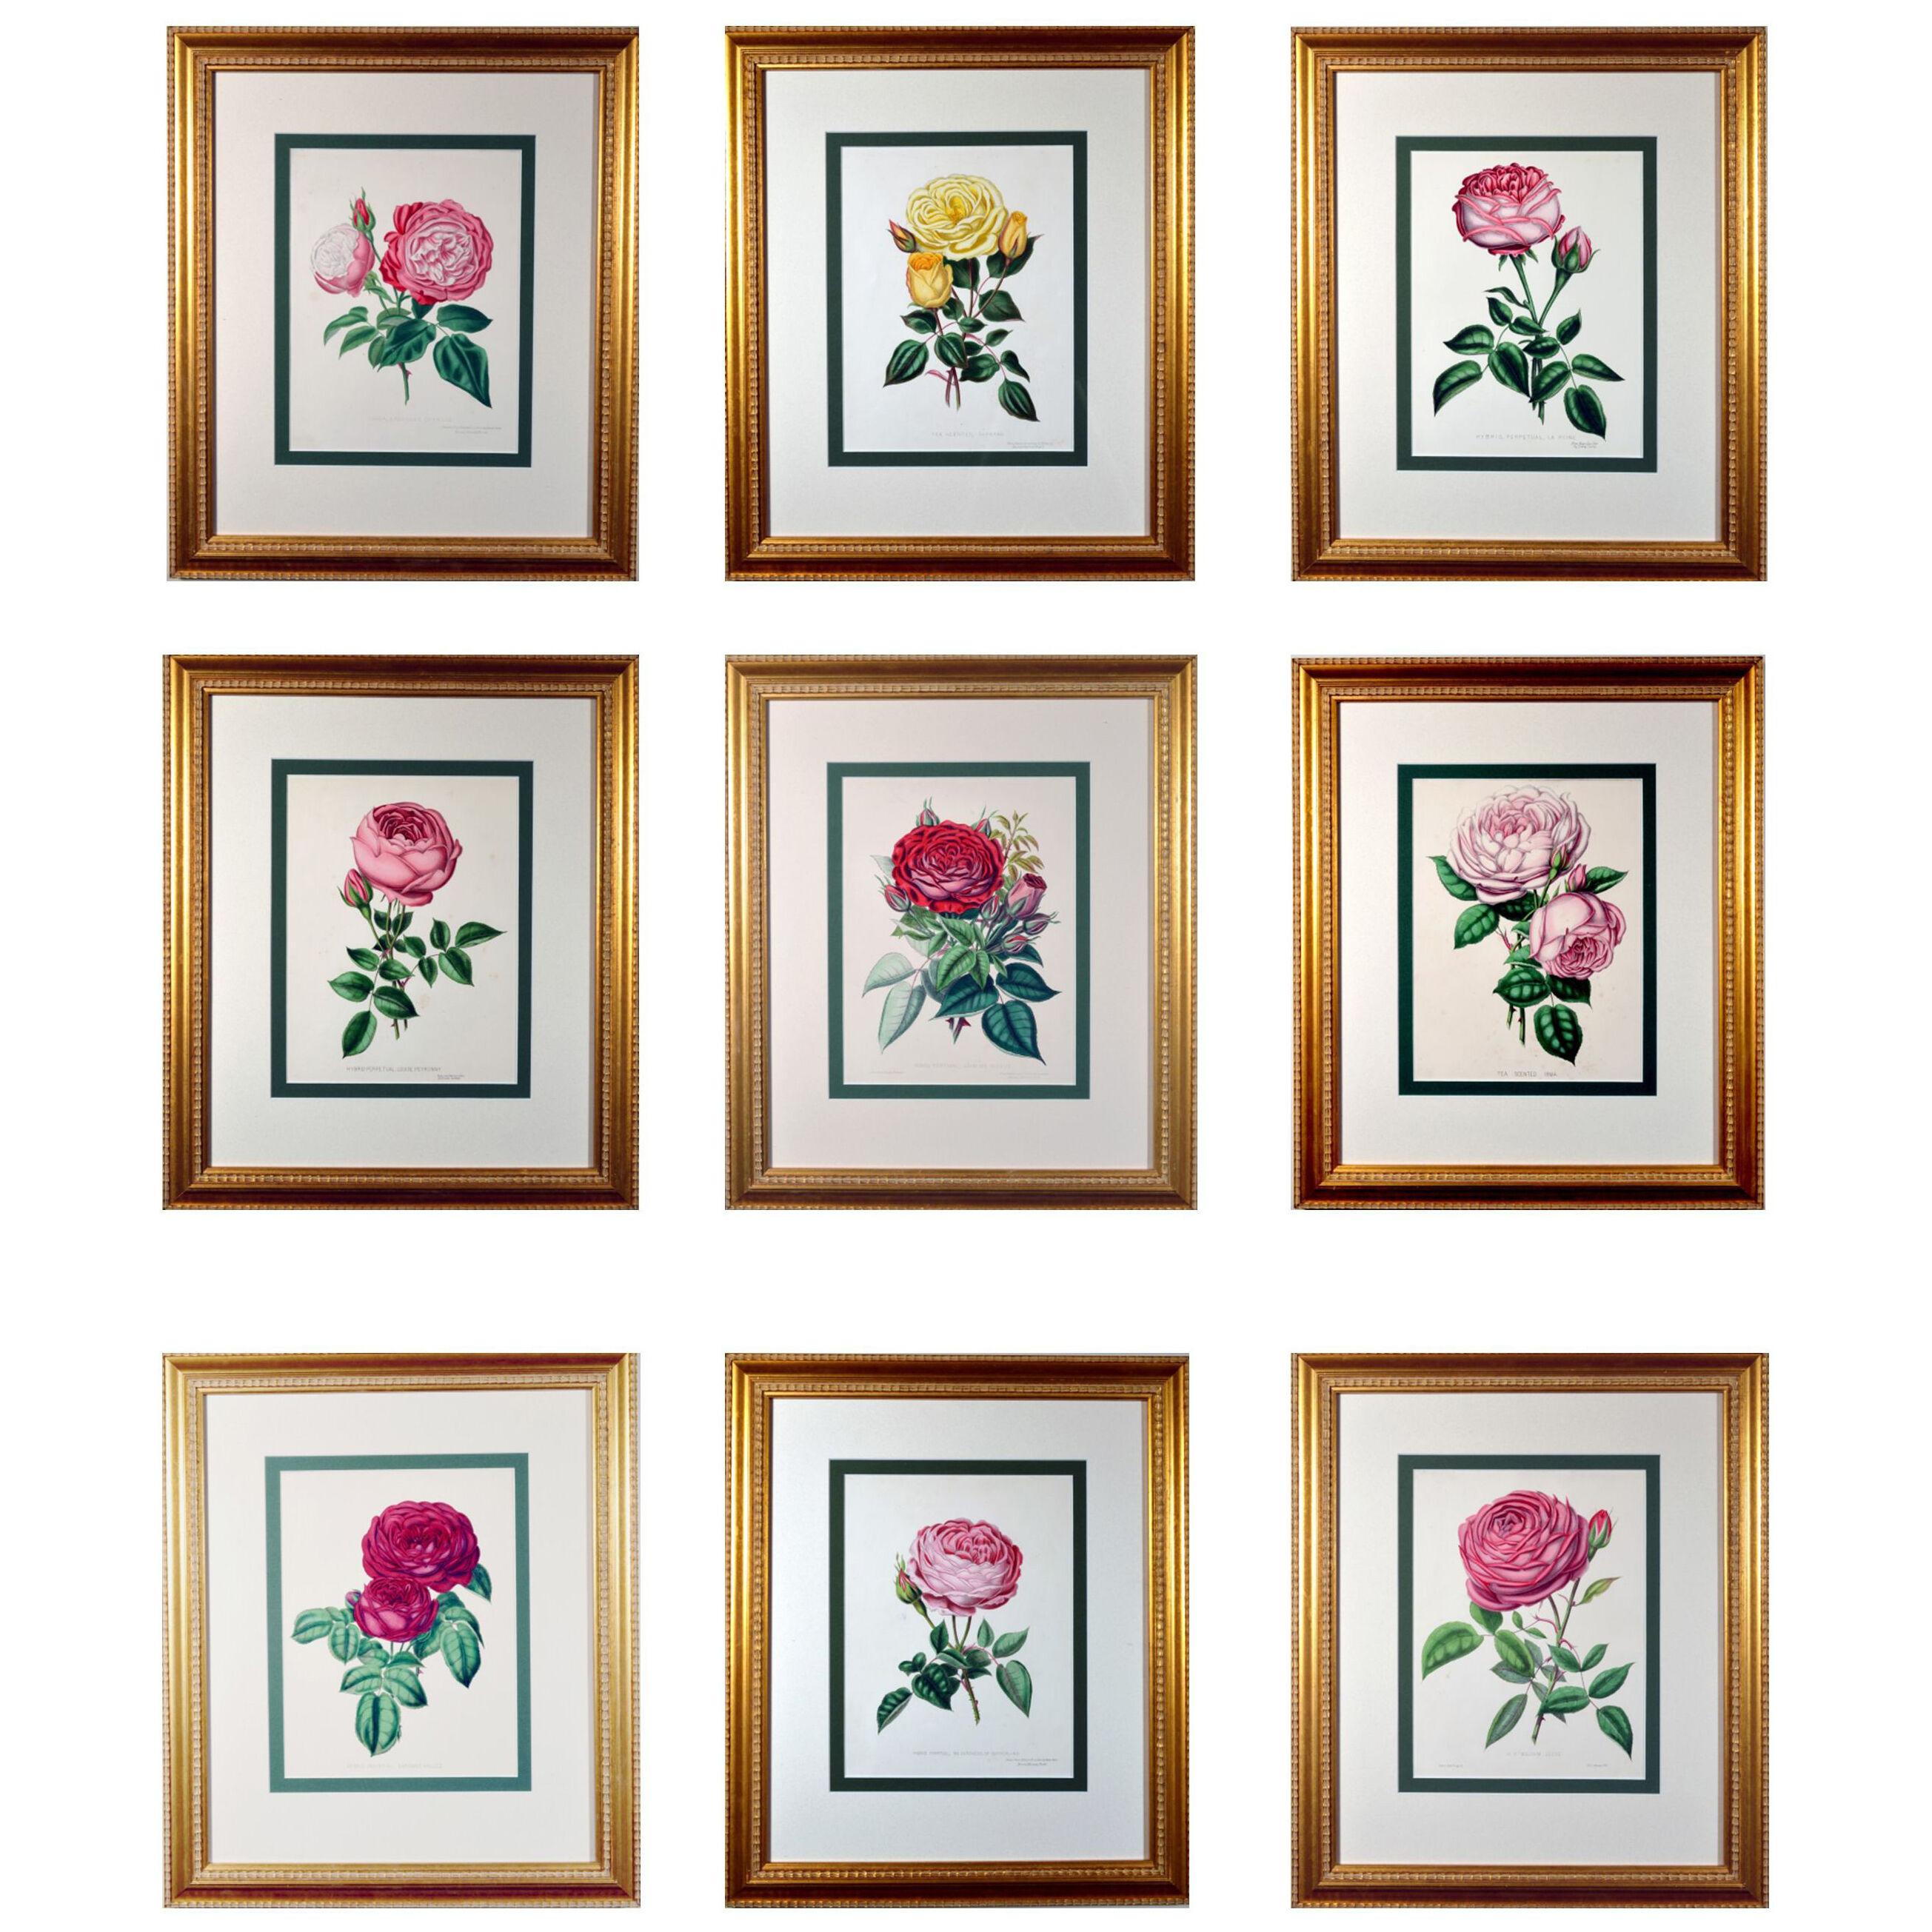 Set of Nine Botanical Engravings of Roses, Henry Curtis-"The Beauty of the Rose"